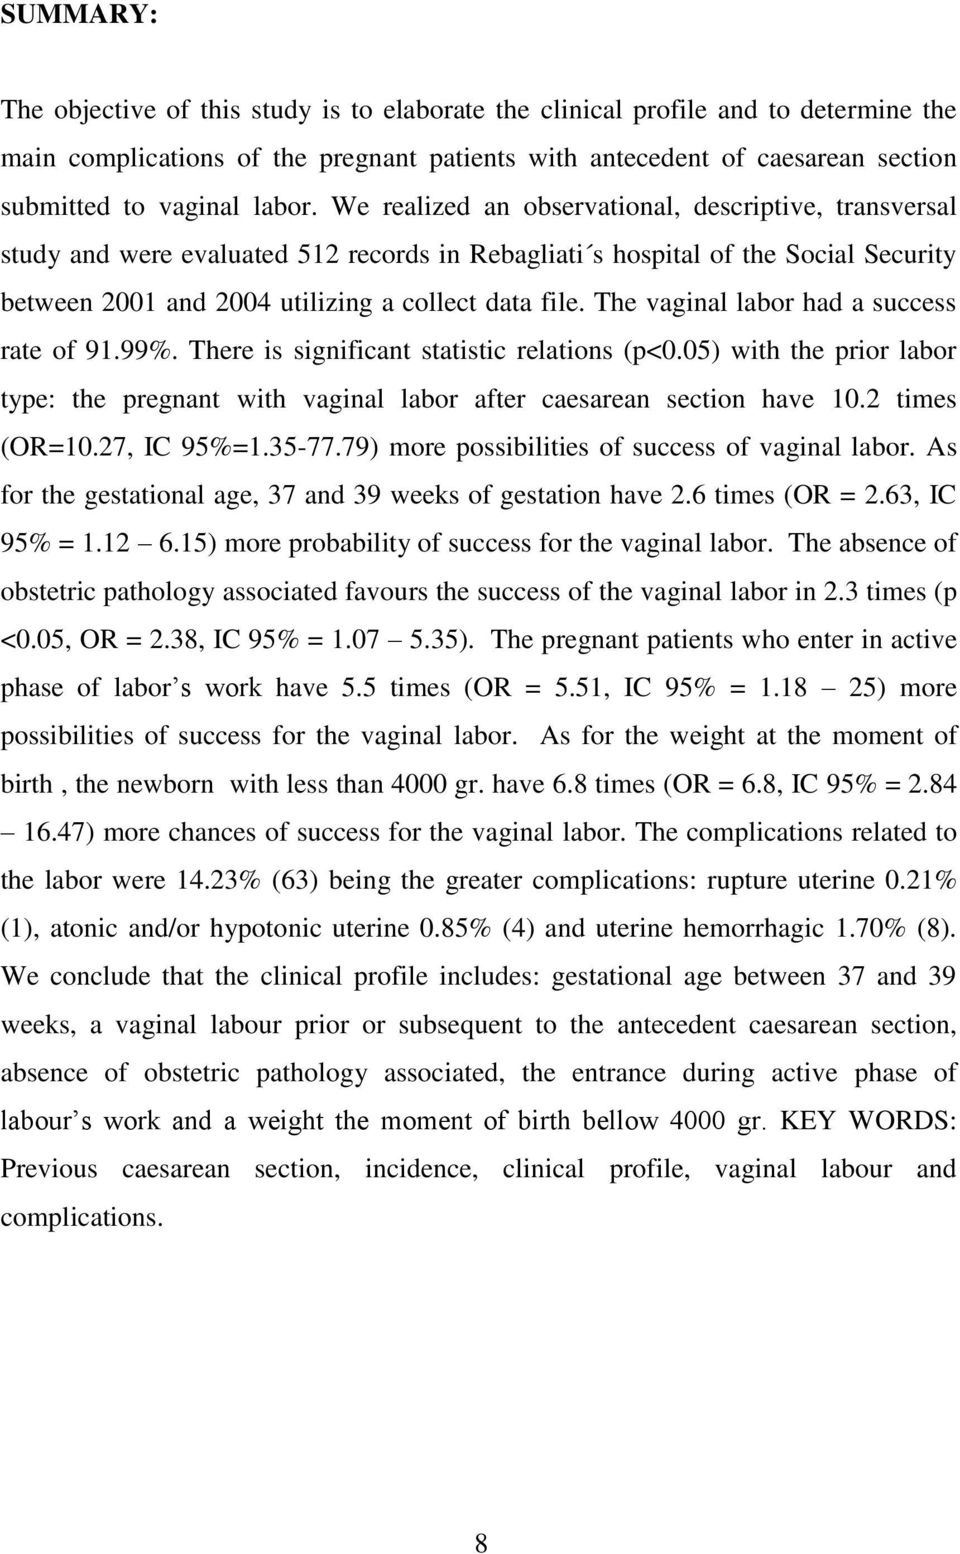 The vaginal labor had a success rate of 91.99%. There is significant statistic relations (p<0.05) with the prior labor type: the pregnant with vaginal labor after caesarean section have 10.